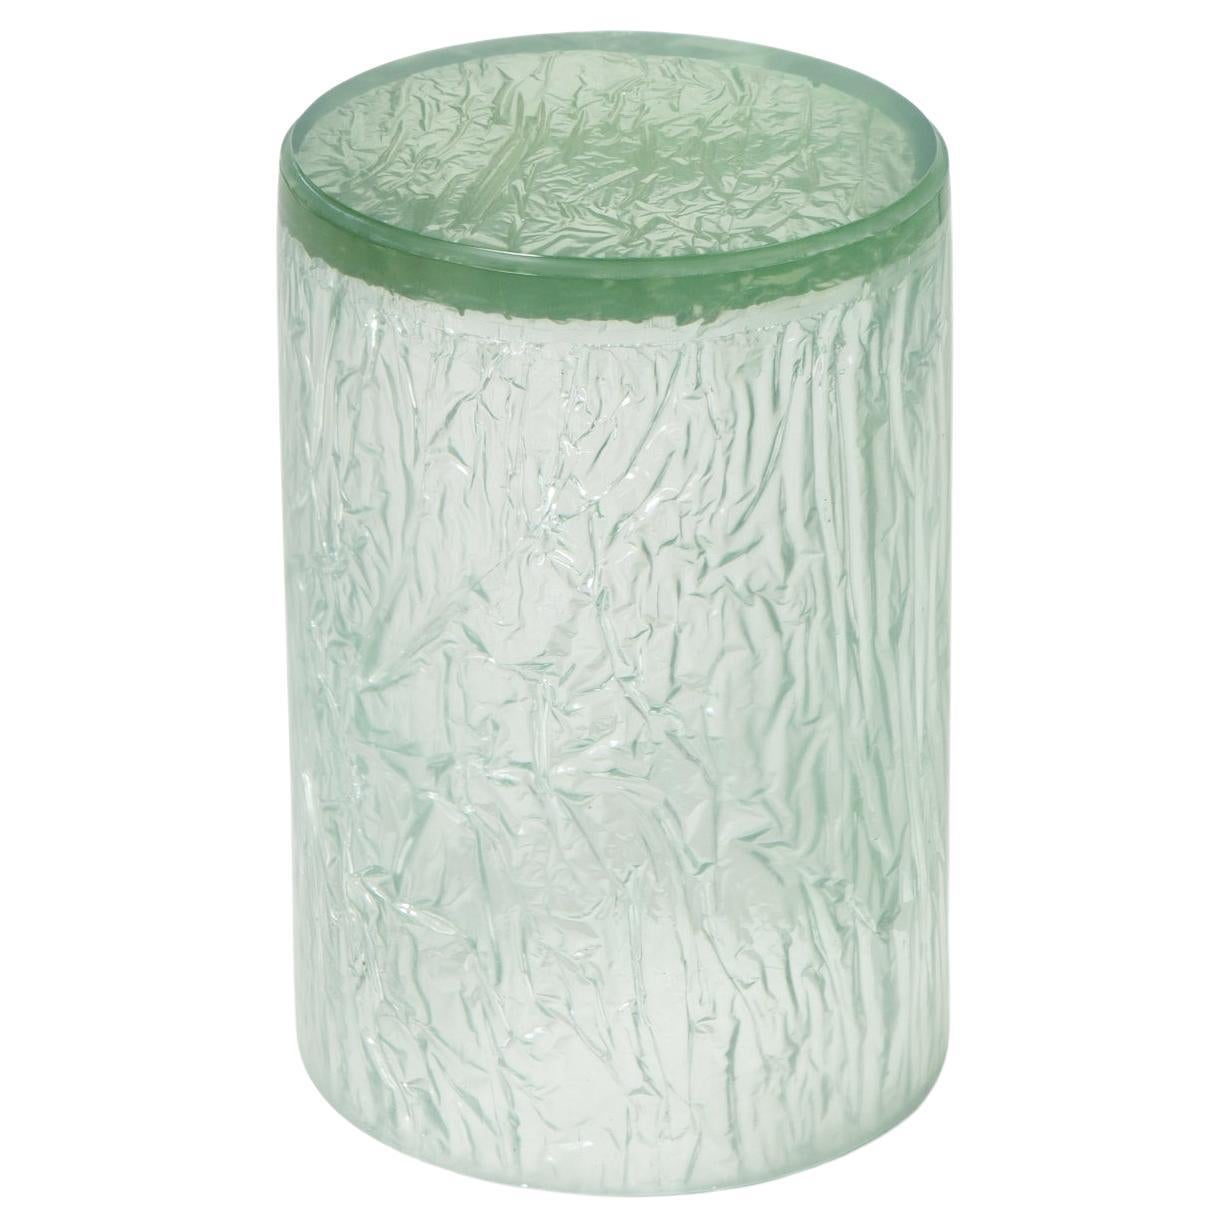 Contemporary Resin Acrylic Side Table or Stool by Natalie Tredgett, Gloss, Green For Sale